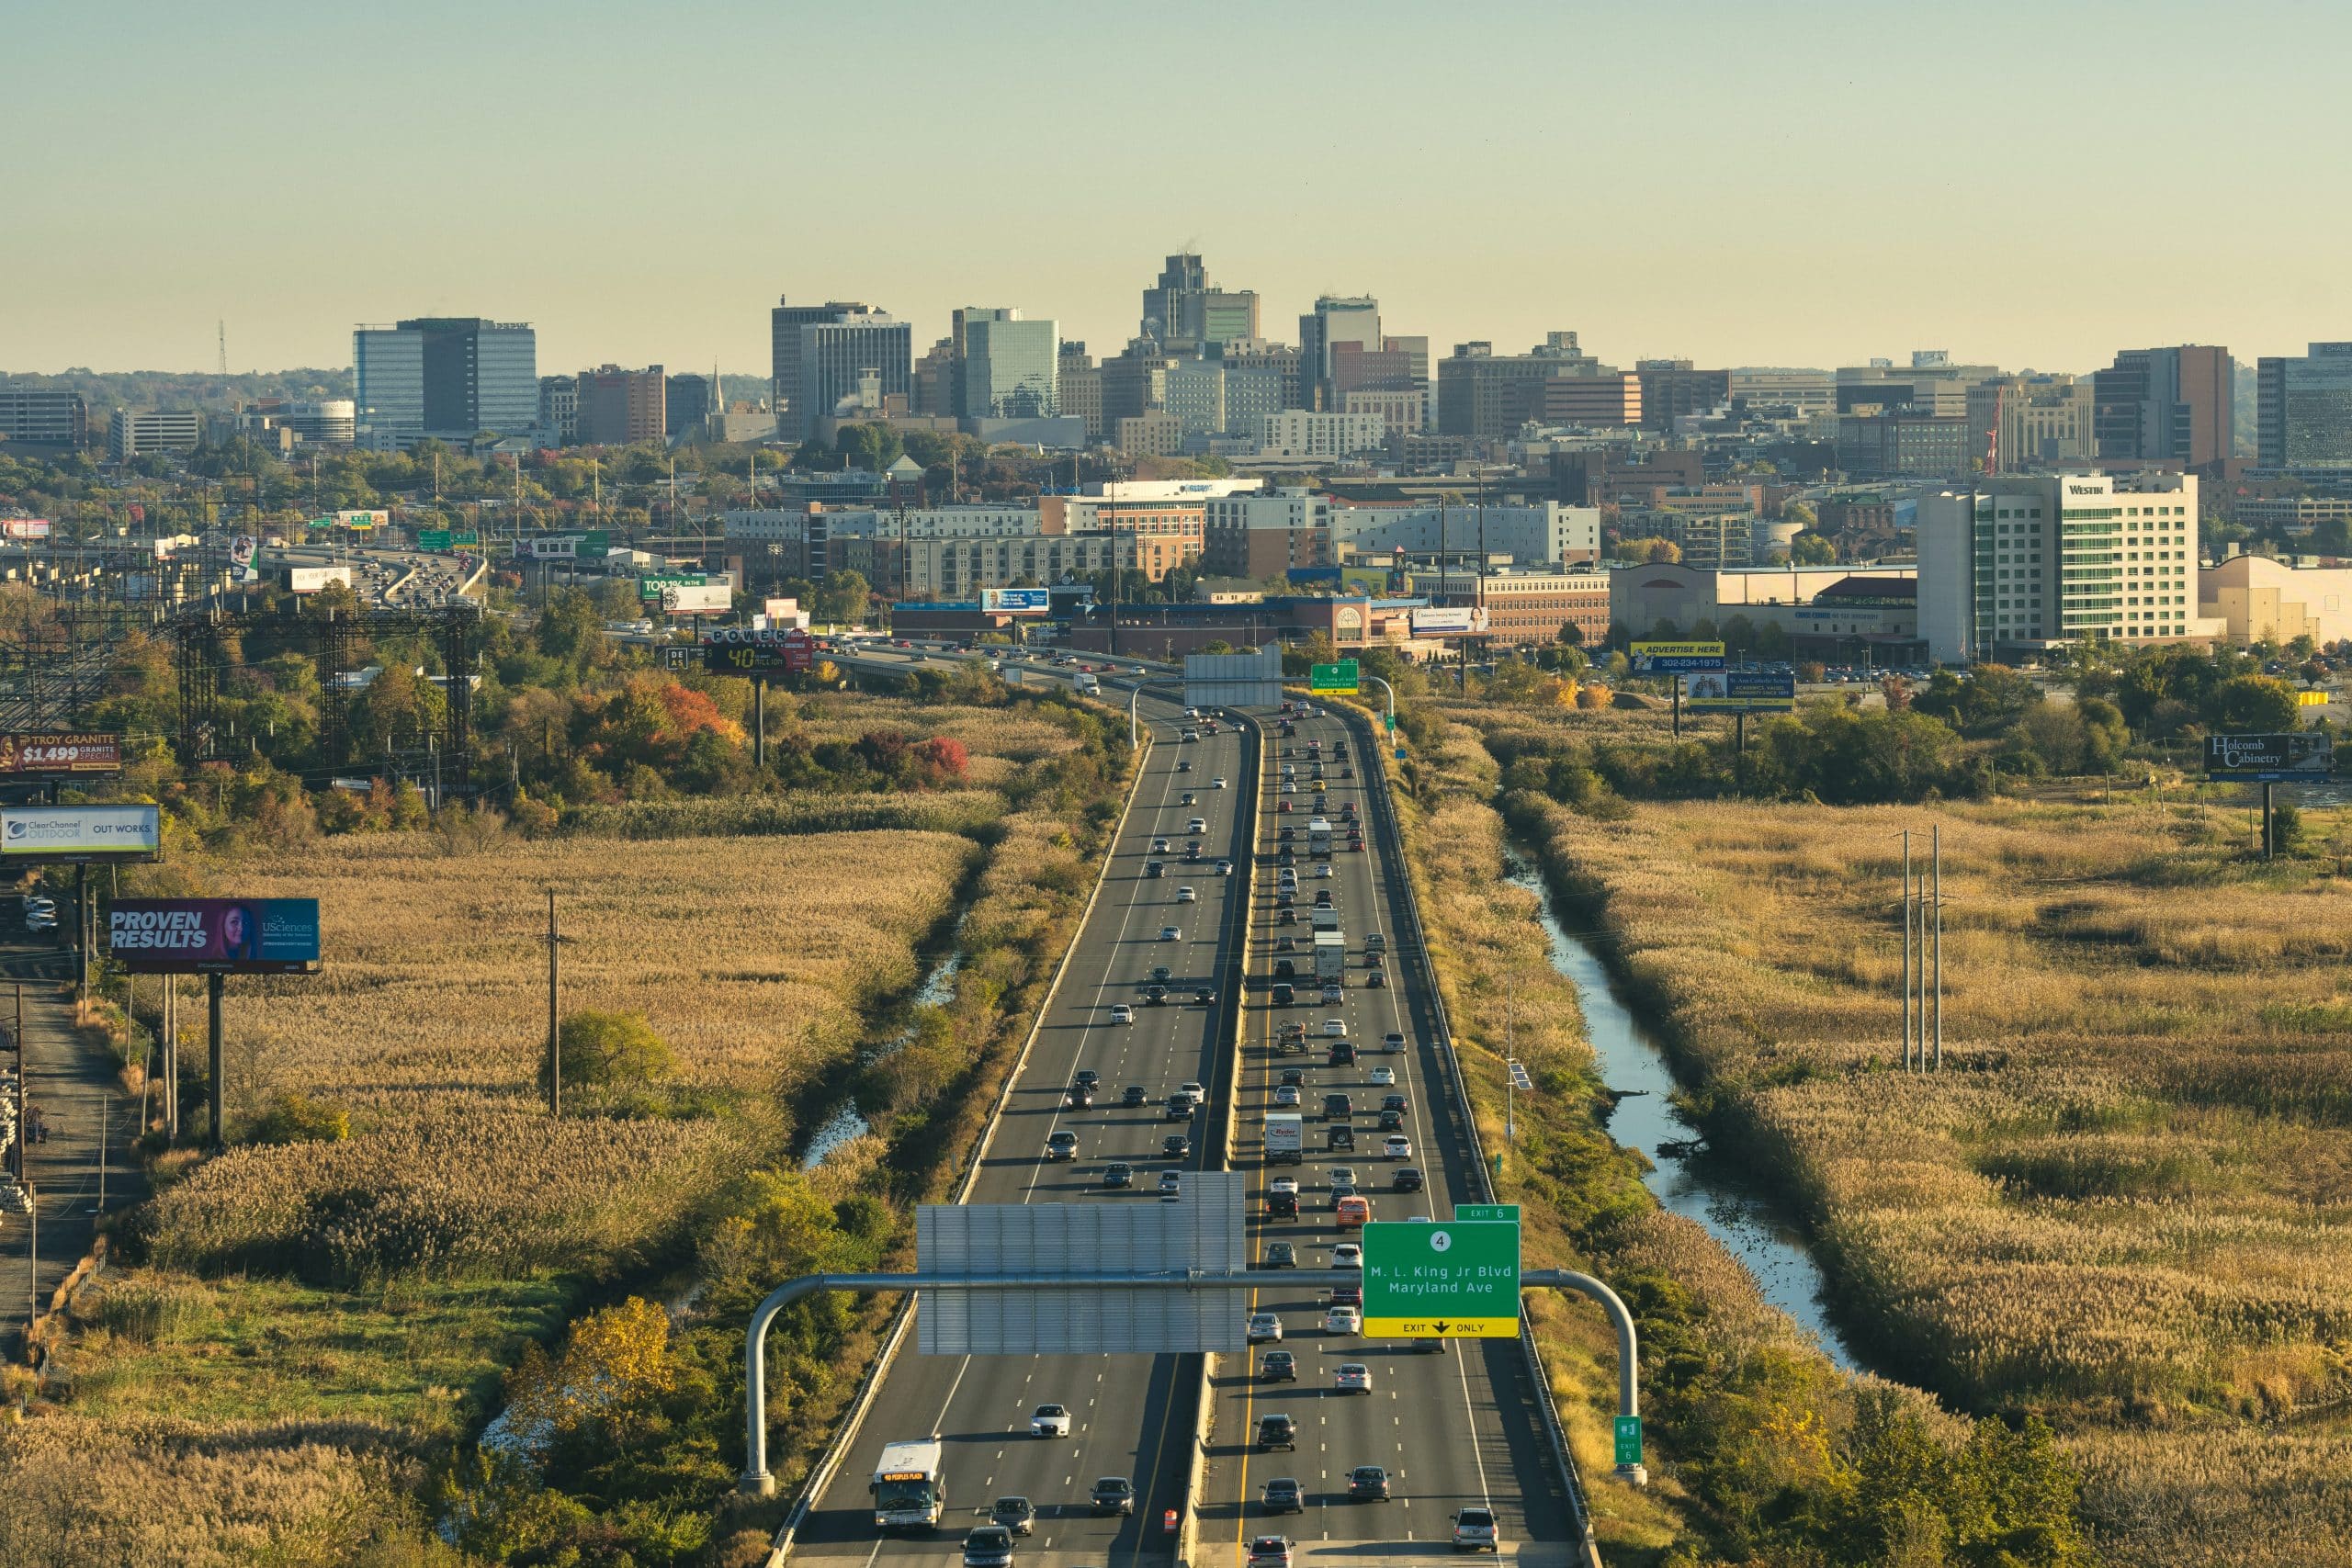 Aerial view of highway leading into city landscape of Wilmington, DE